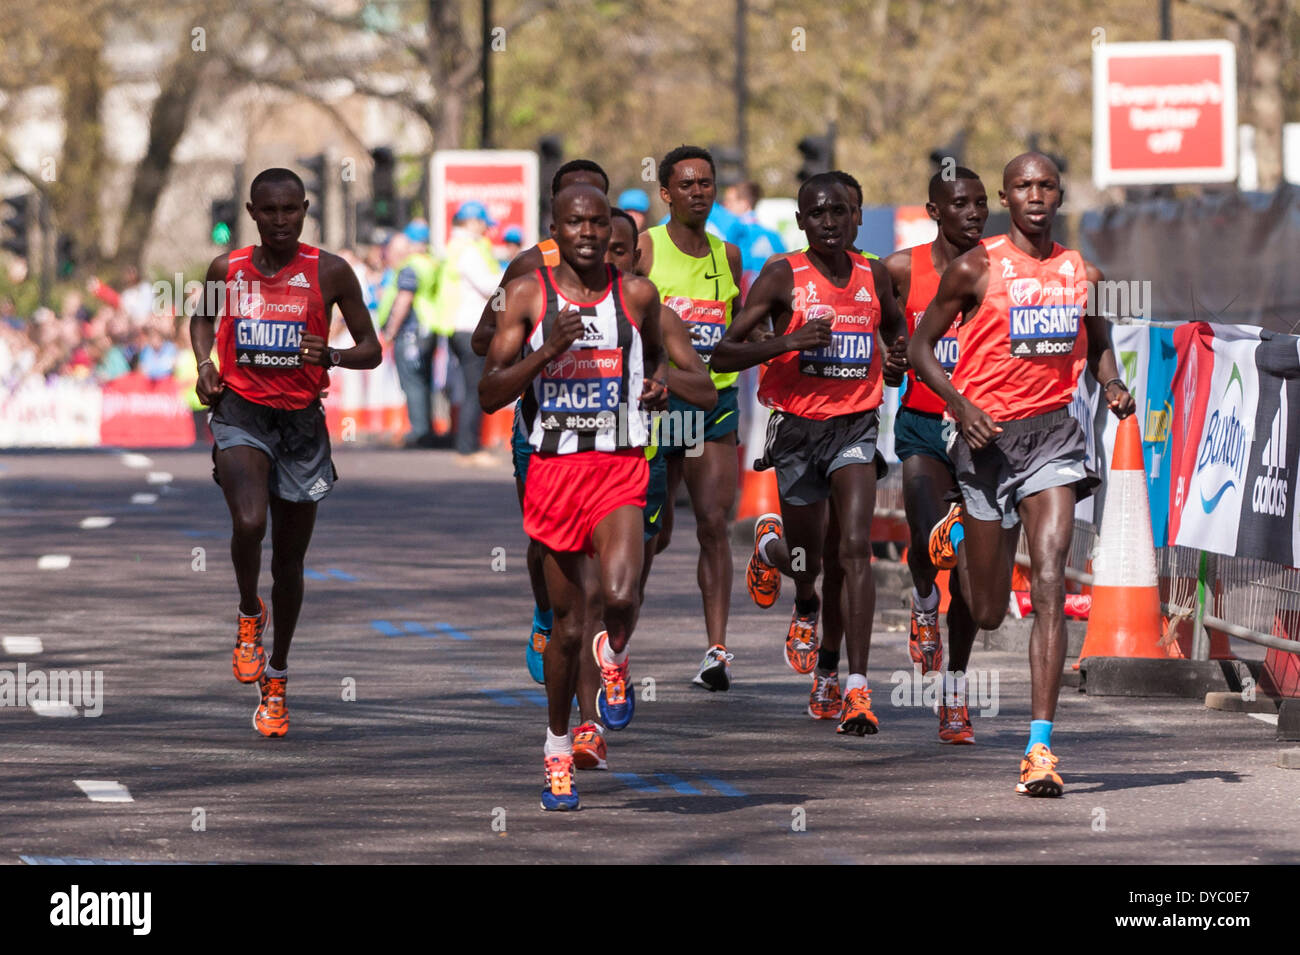 East Smithfield, London, UK, 13 April 2014, near mile 13, Virgin Money London Marathon 2014.  Elite men's lead pack includes Wilson Kipsang (Kenya), right, who would go on to win the race in a course record time of 2:04.27, and earn his second London Marathon title.   Credit:  Stephen Chung/Alamy Live News Stock Photo